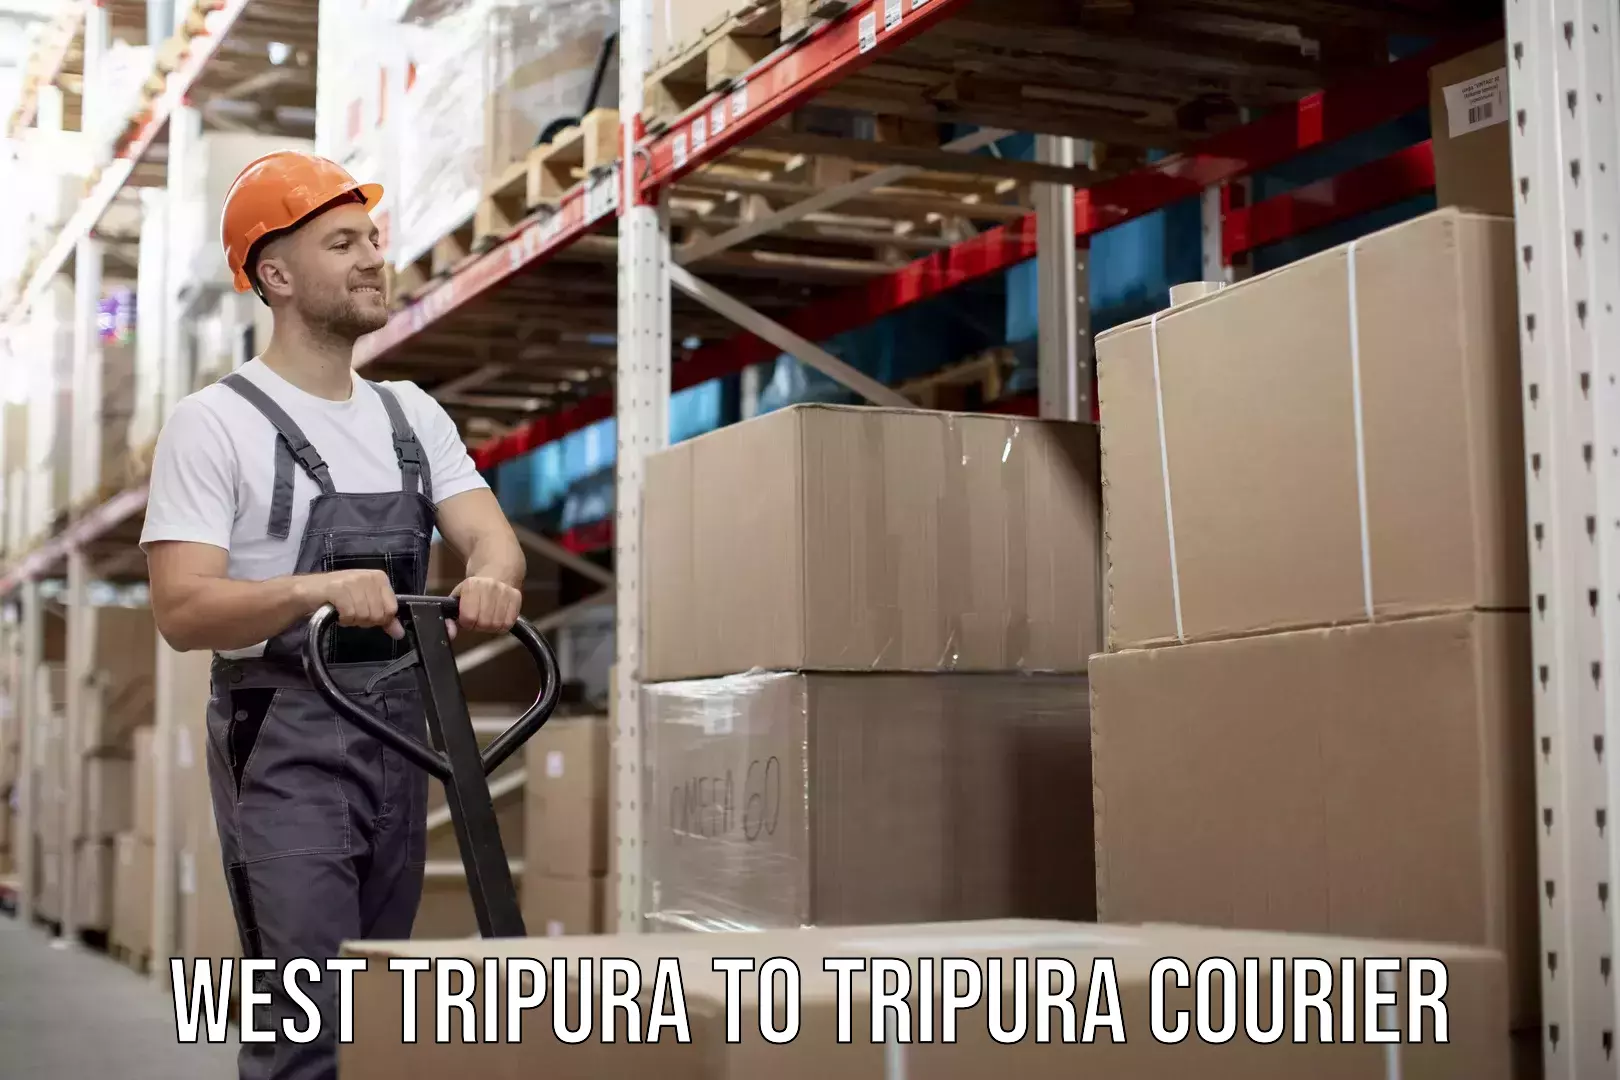 State-of-the-art courier technology West Tripura to Tripura